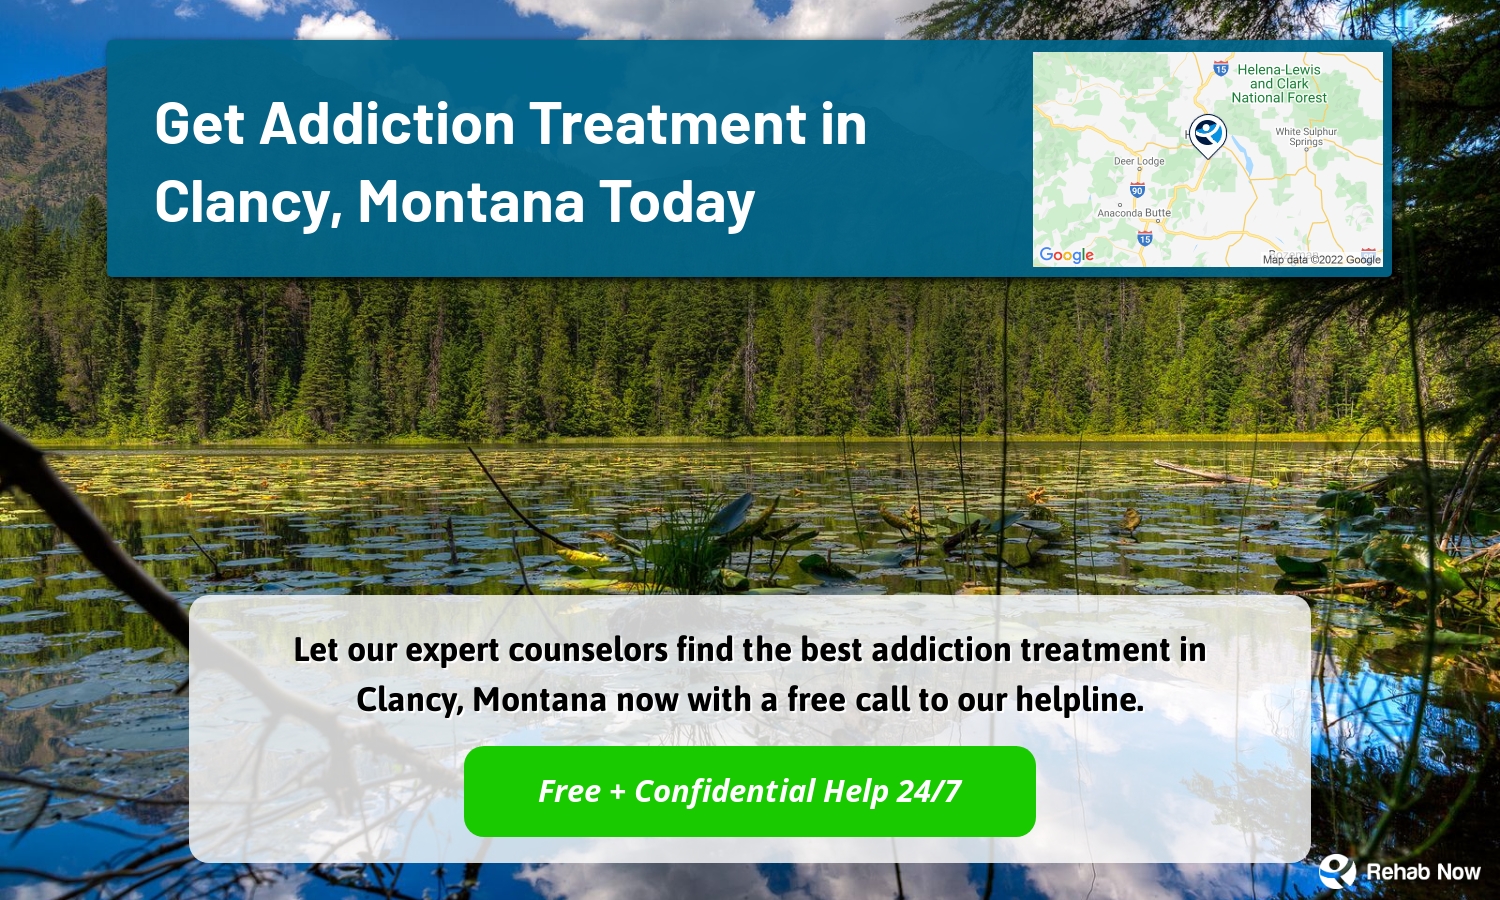 Let our expert counselors find the best addiction treatment in Clancy, Montana now with a free call to our helpline.